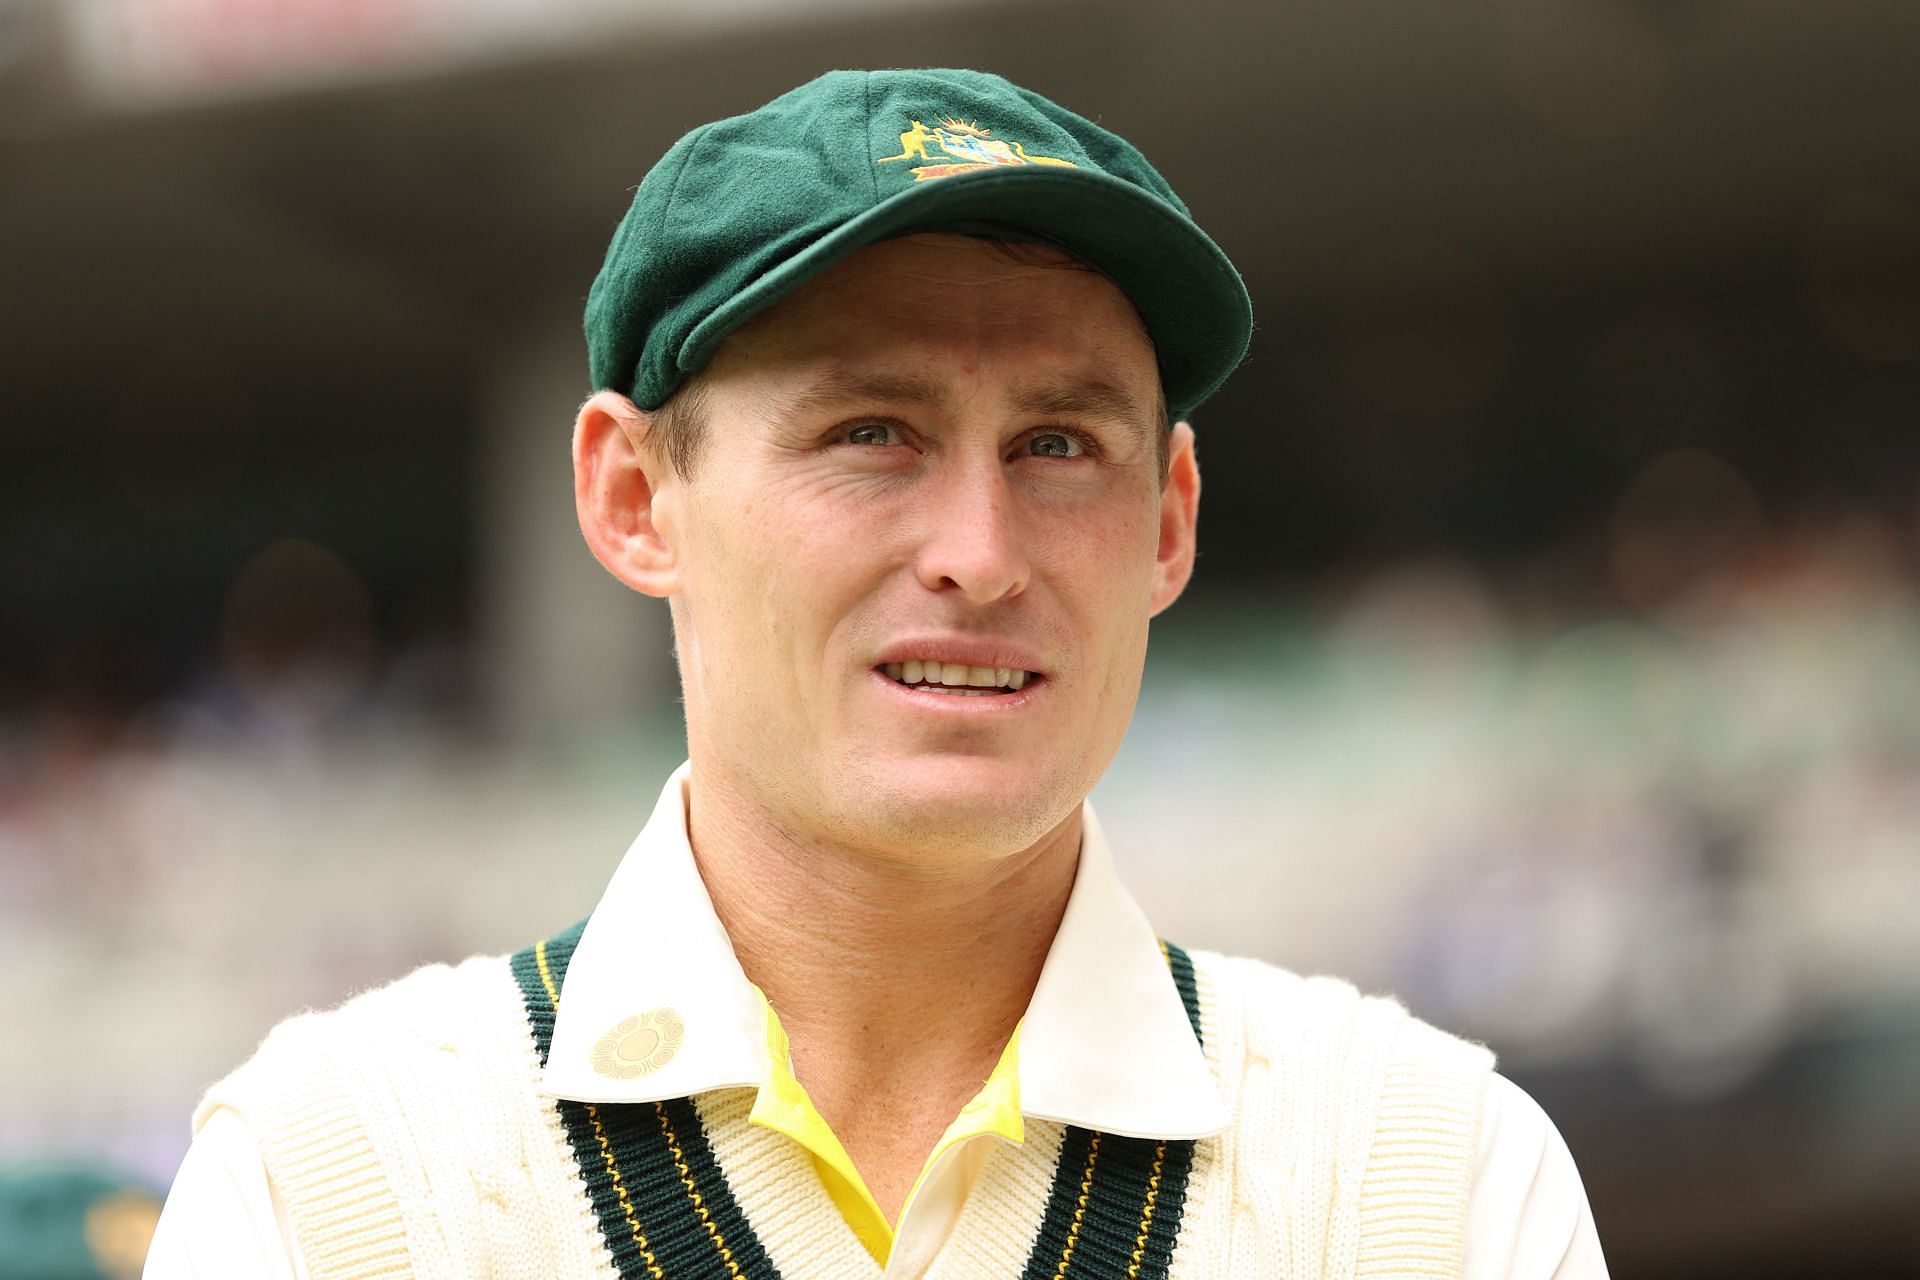 Marnus Labuschagne could well attract bids in the IPL 2022 Auction.